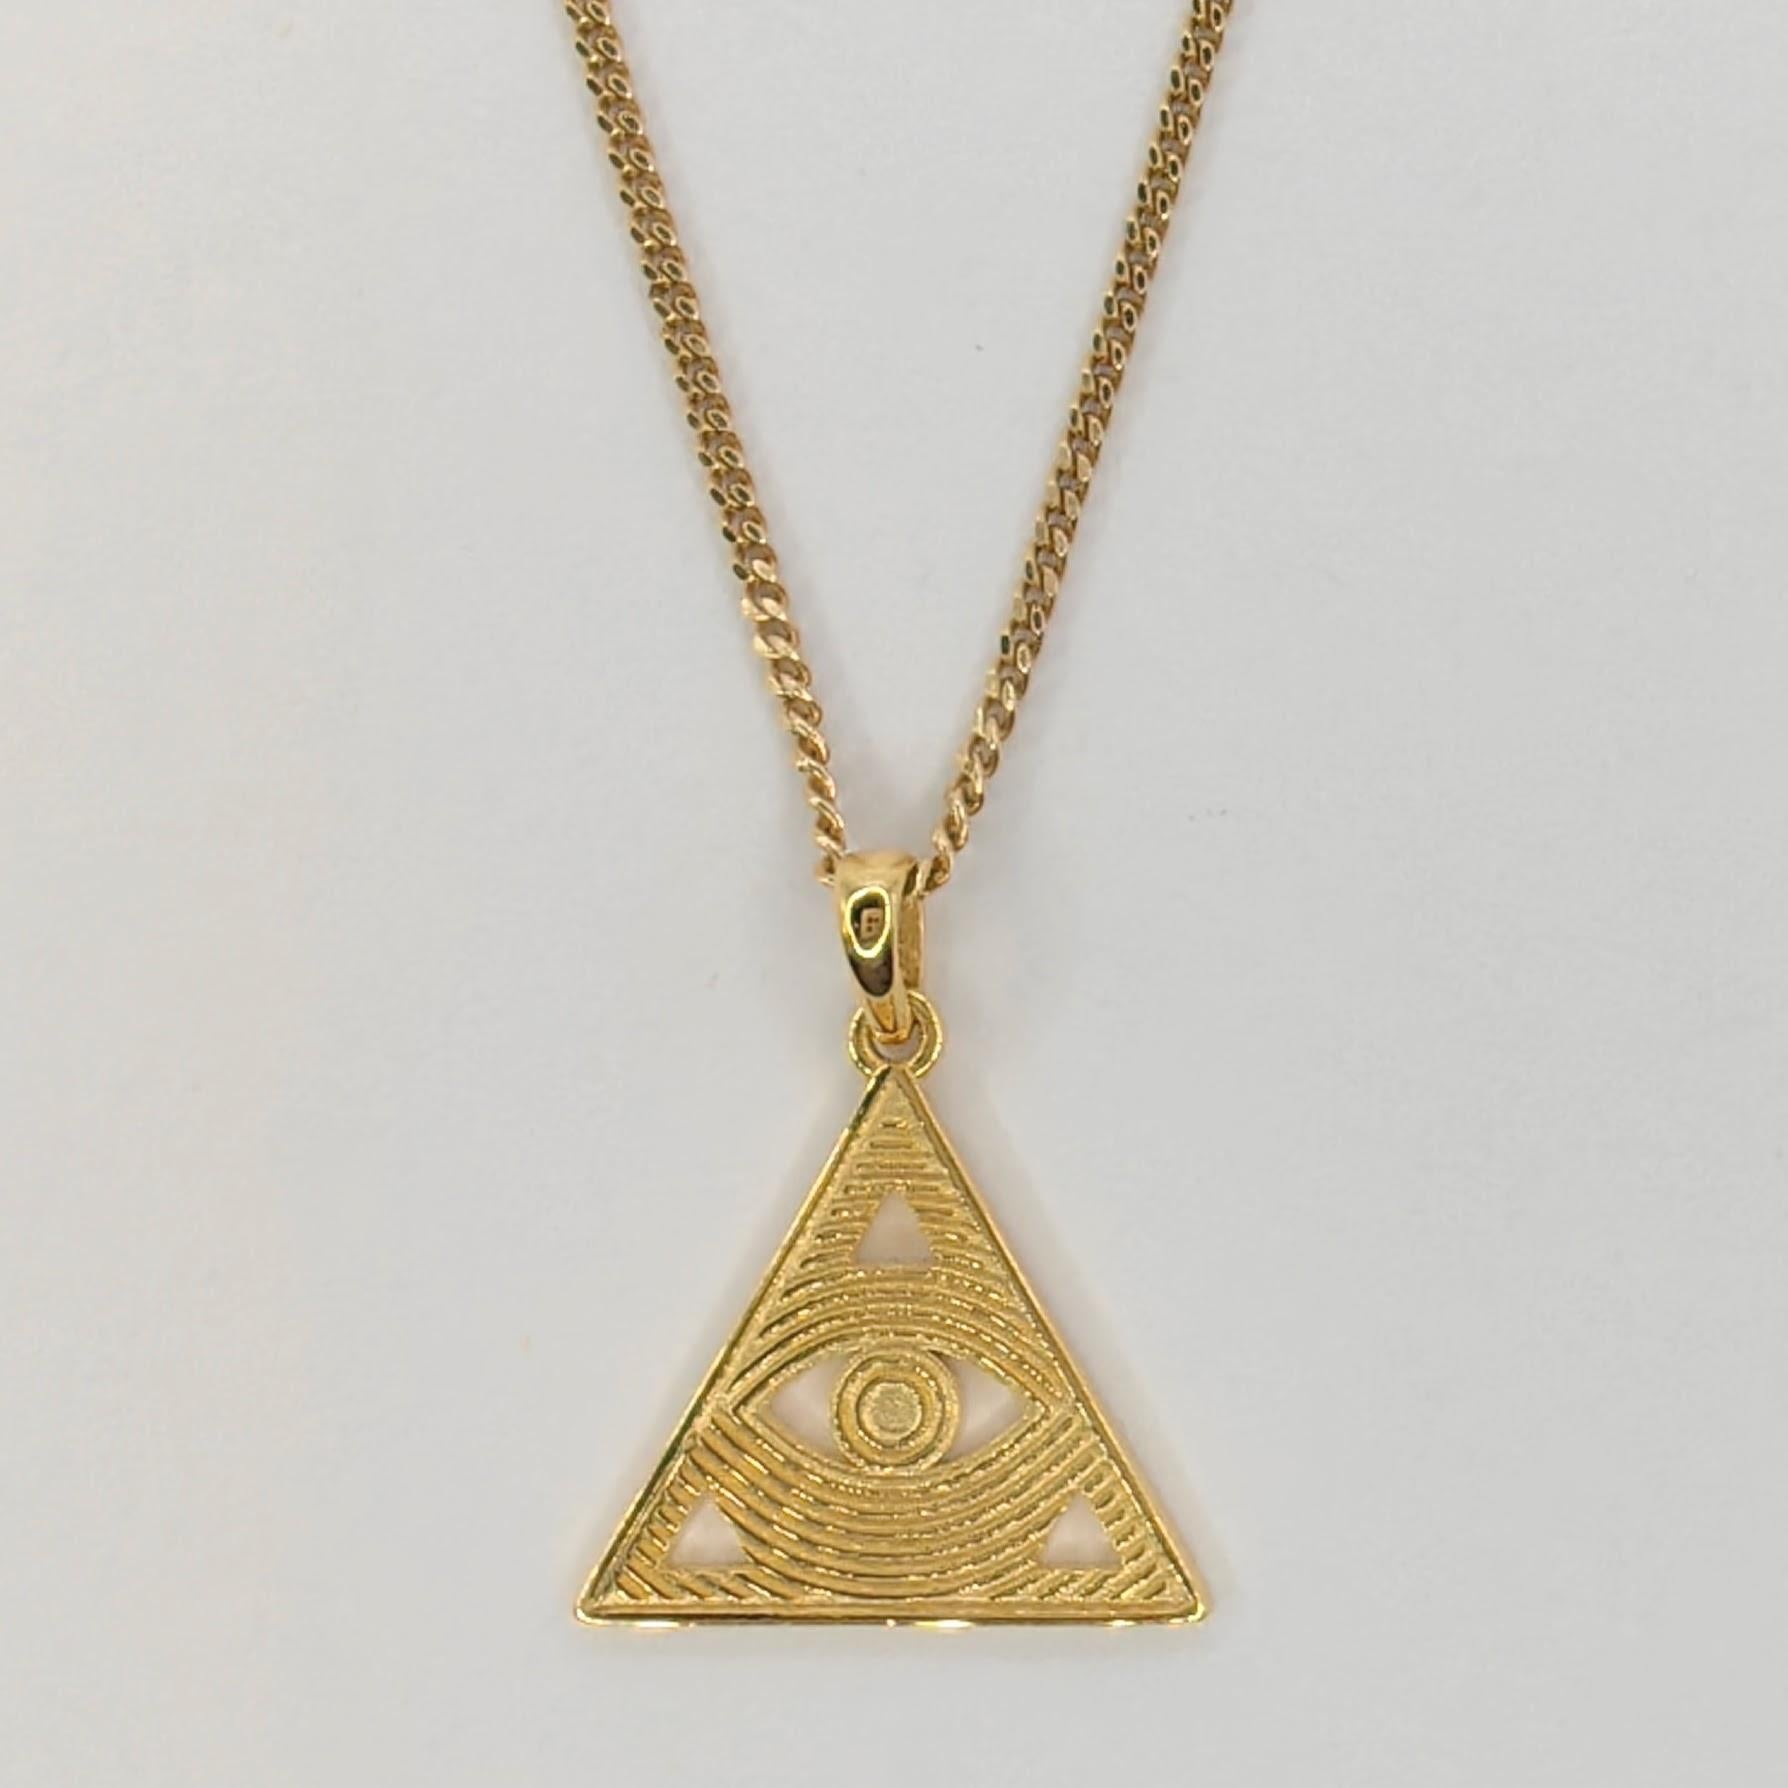 Introducing our Evil Eye Triangle Necklace Pendant, a captivating and symbolic piece that combines the powerful protective symbol of the Evil Eye with exquisite craftsmanship and a modern touch.

With dimensions of 19.9mm x 17.2mm, this pendant